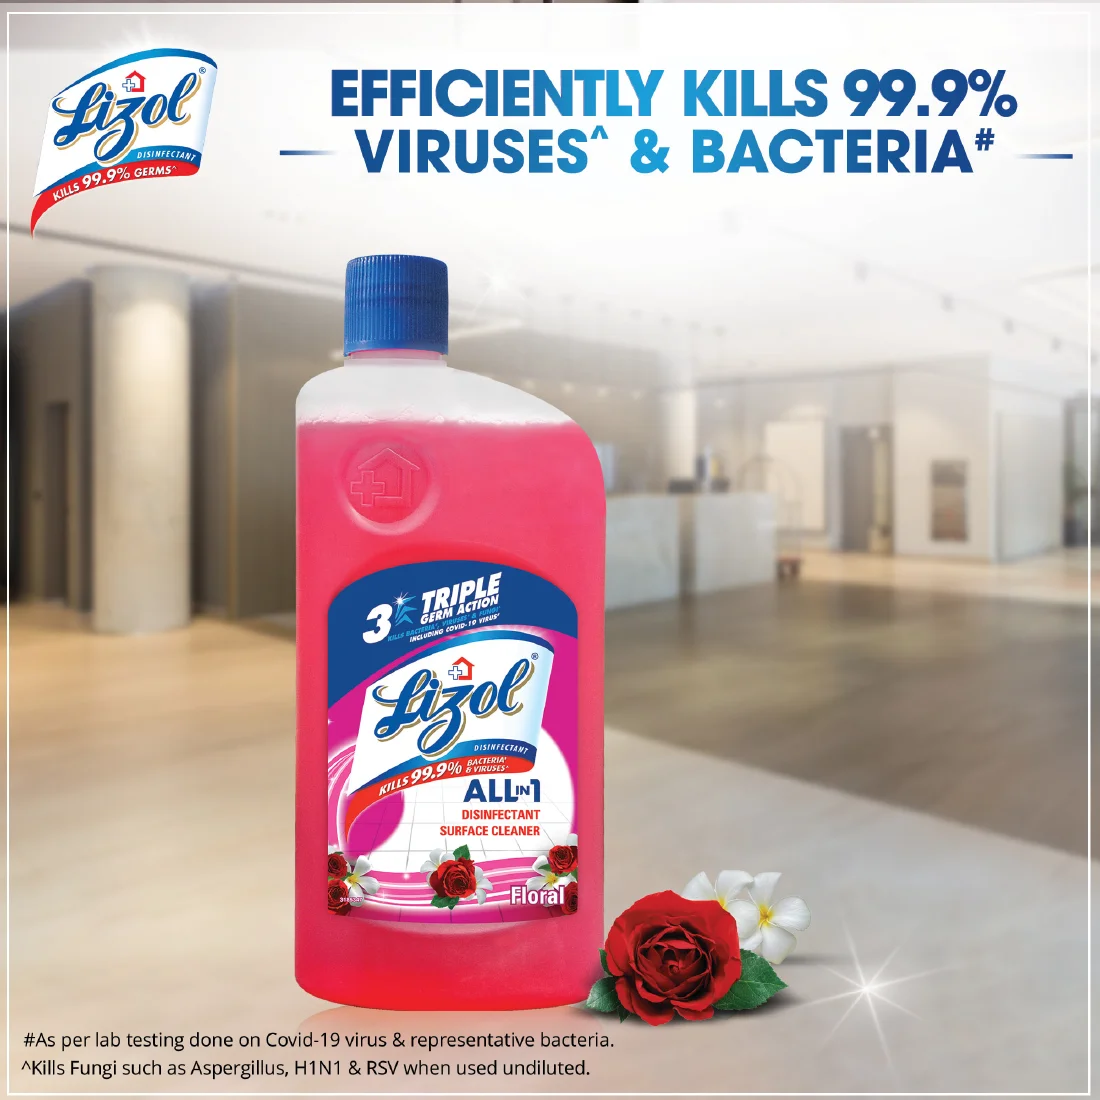 Lizol Disinfectant Surface Cleaner, Floral, 975ml